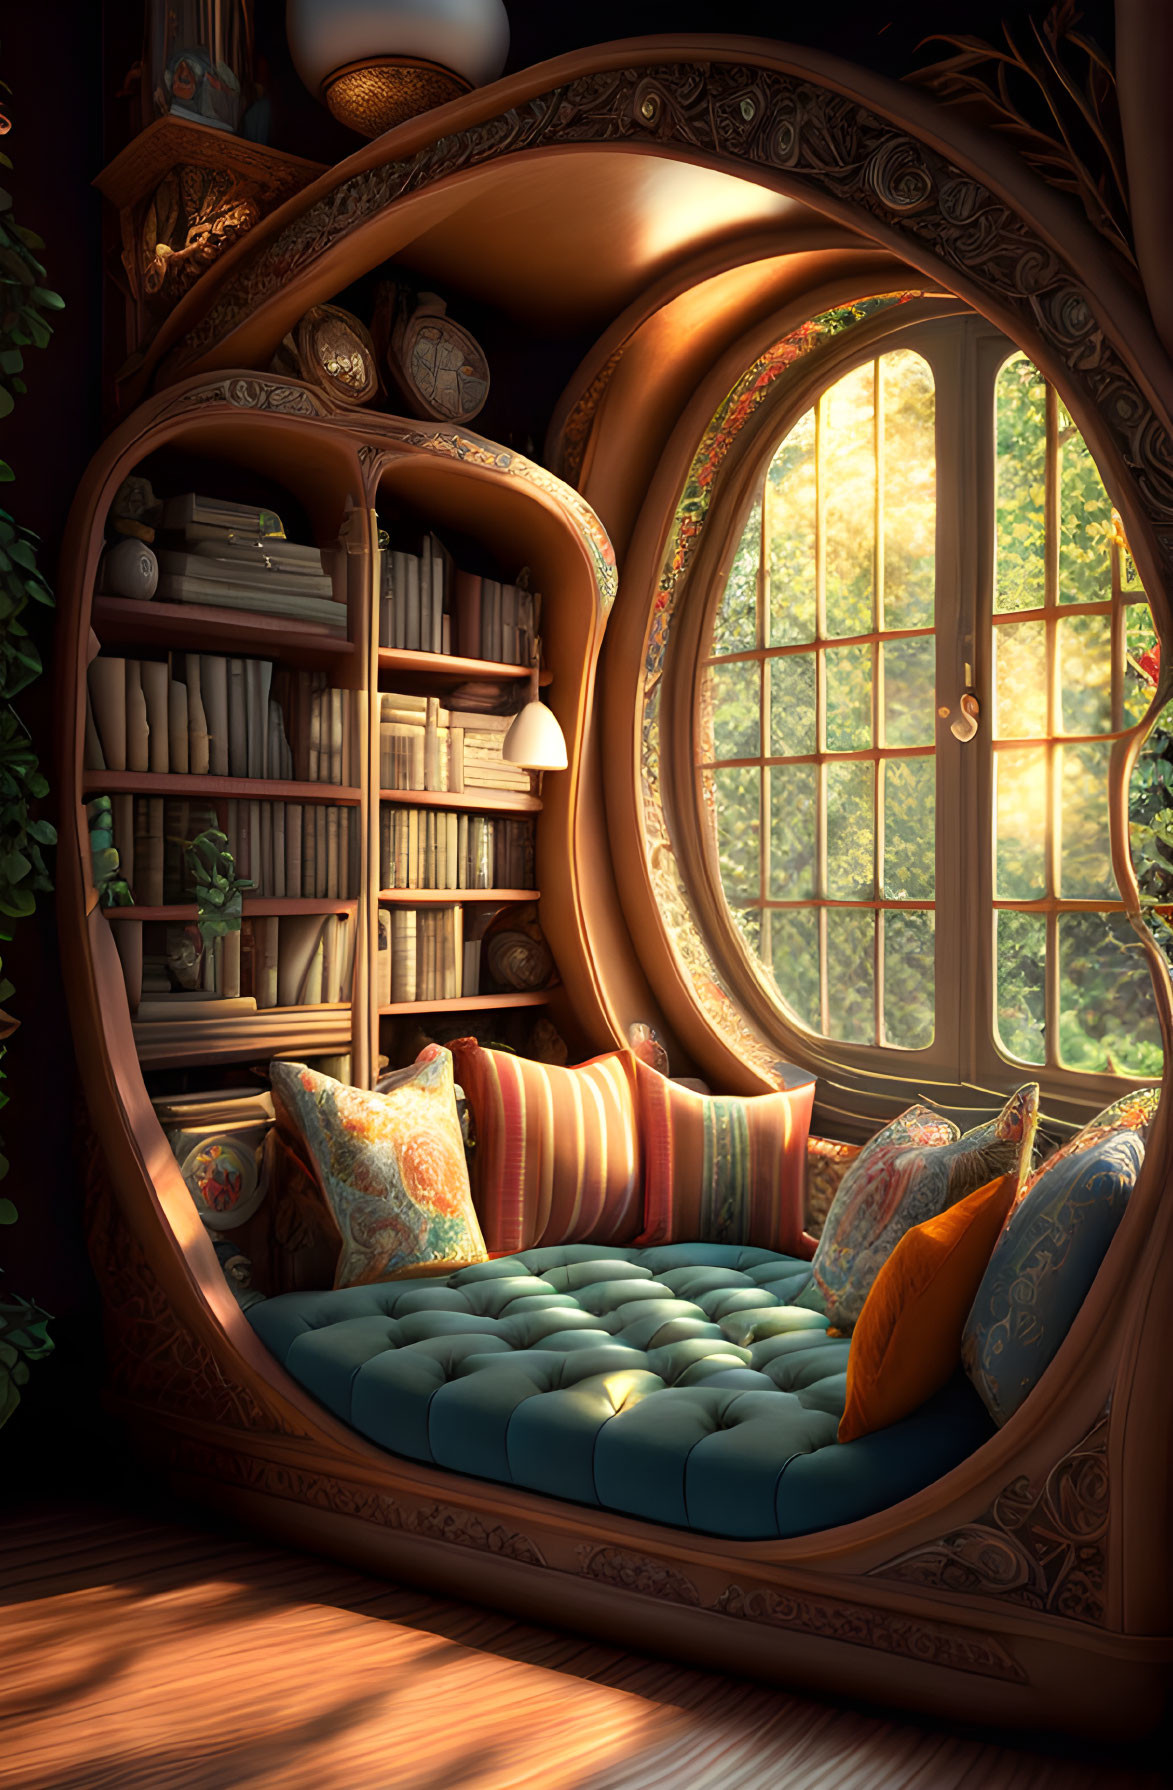 Cozy reading nook with plush cushions and bookshelves by round window